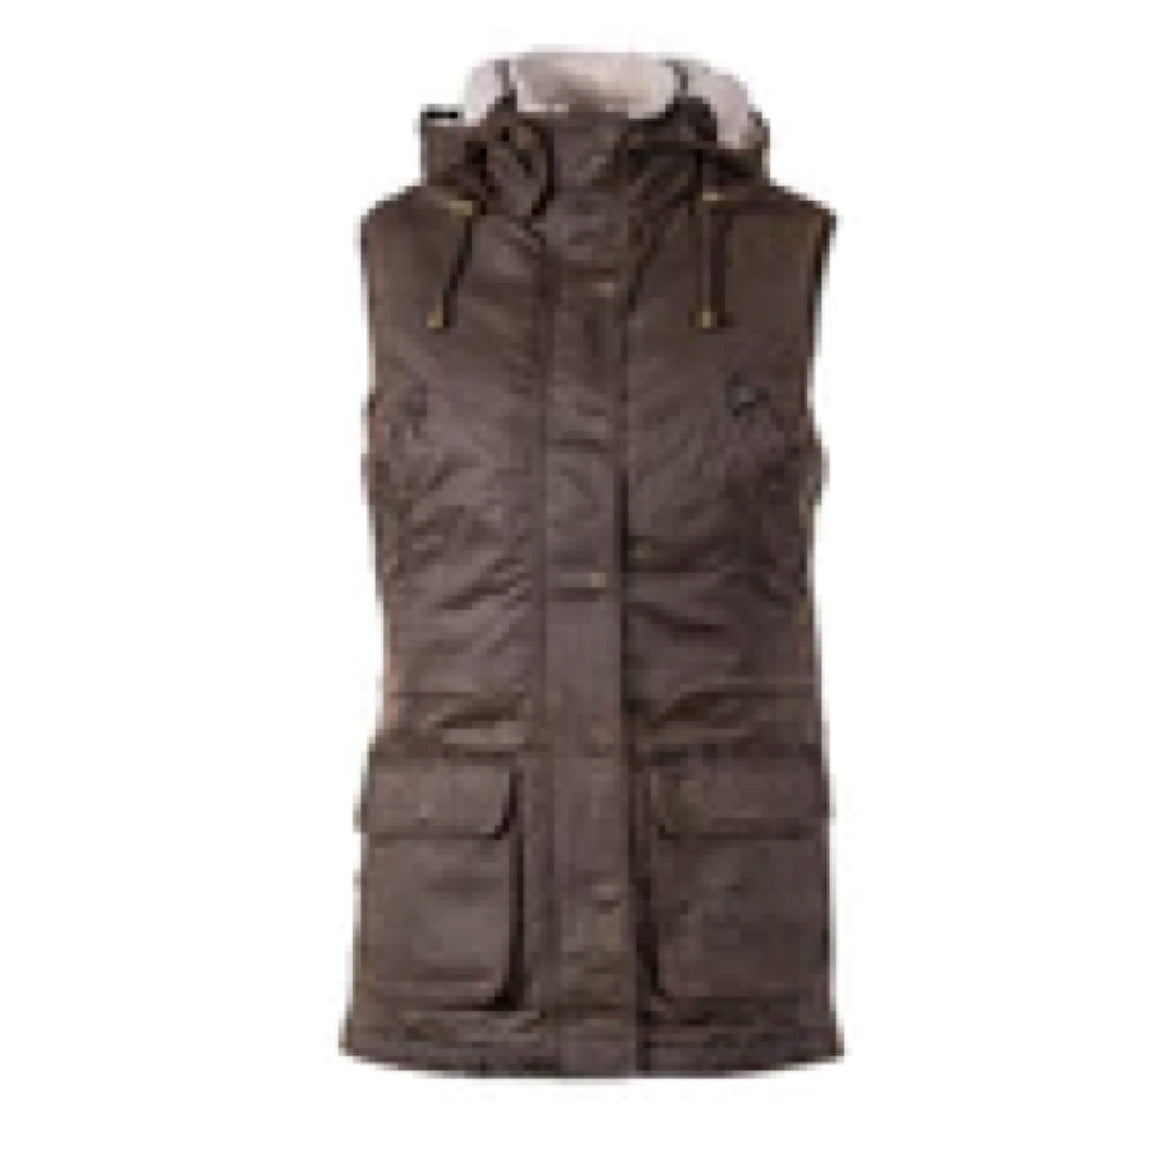 Outback Trading Womens Woodbury Vest Brown